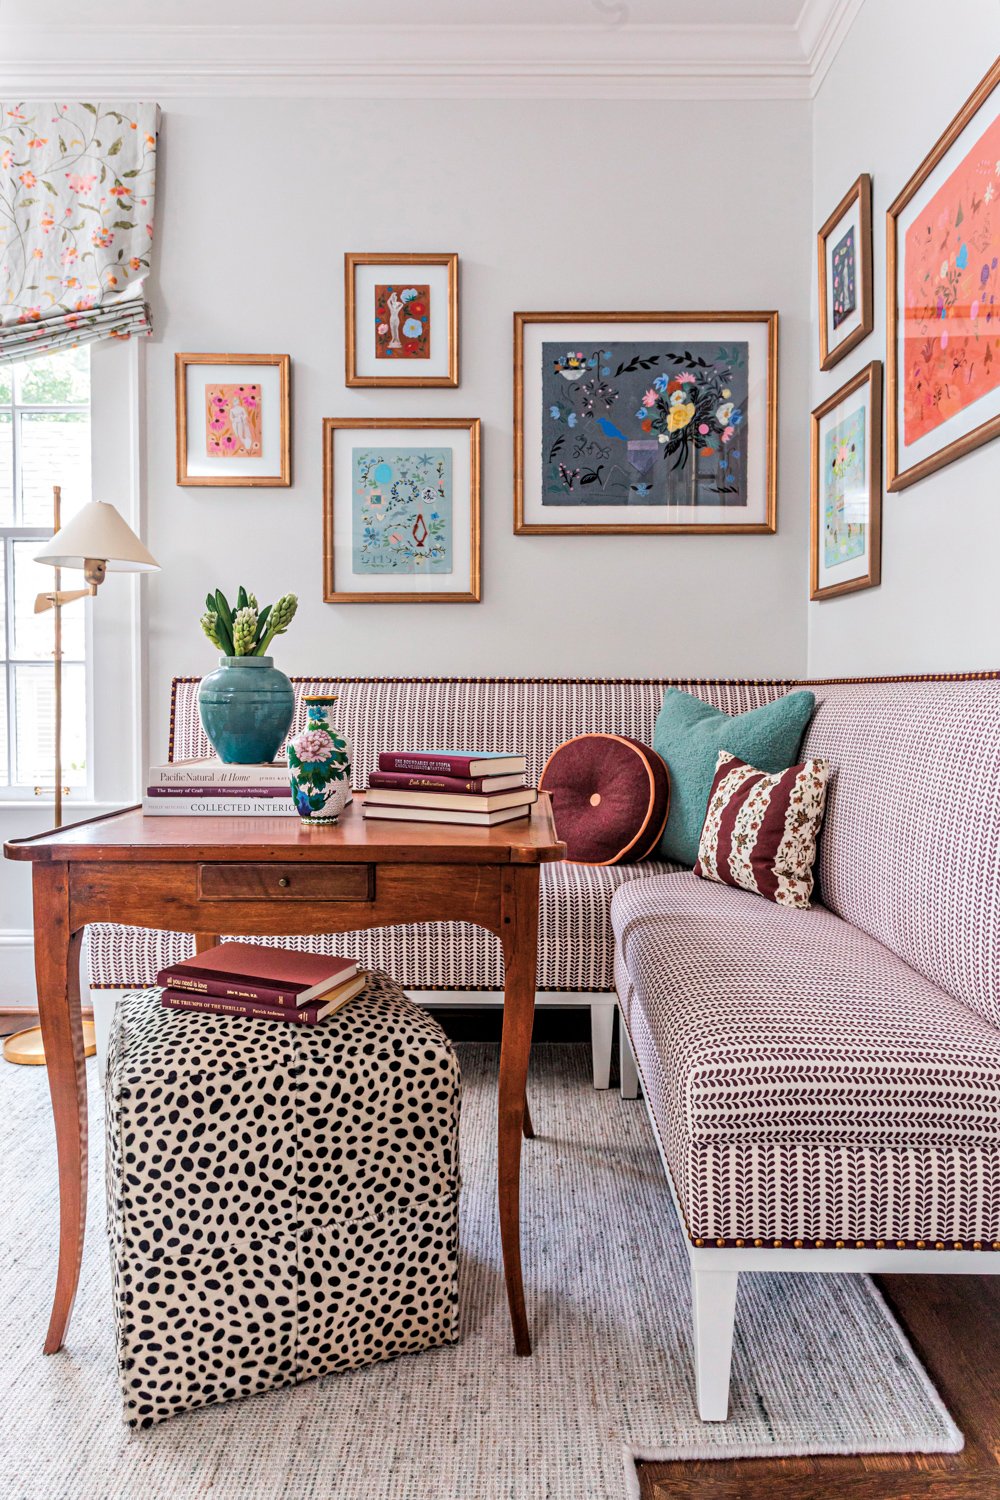 L-shaped banquette forms reading nook with an antique wooden table and floral artworks framed above